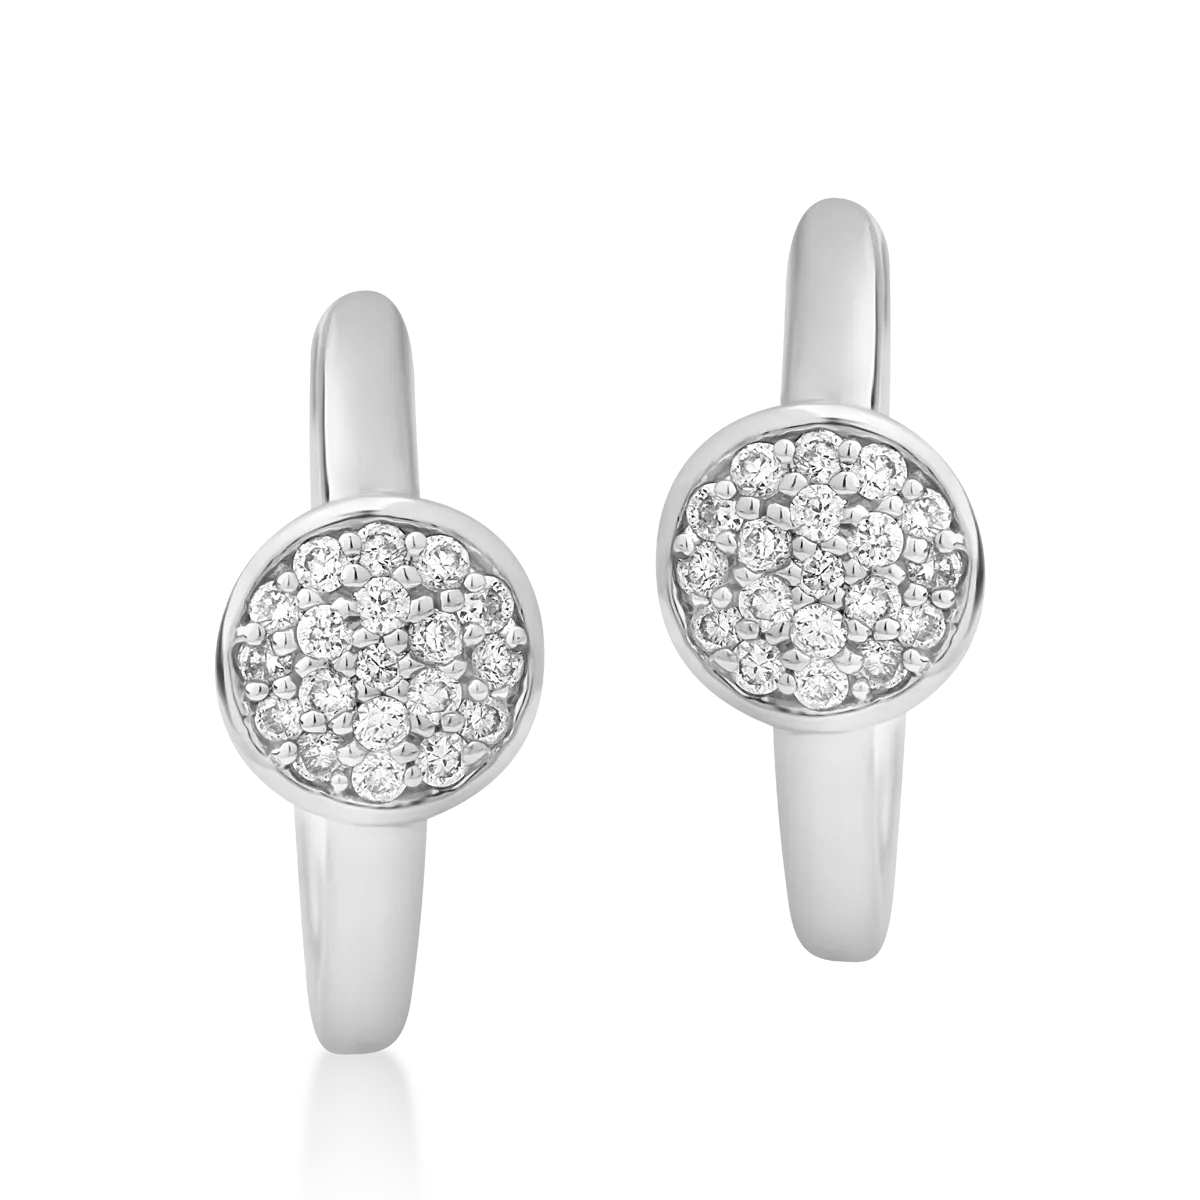 18K white gold earrings with 0.12ct diamond